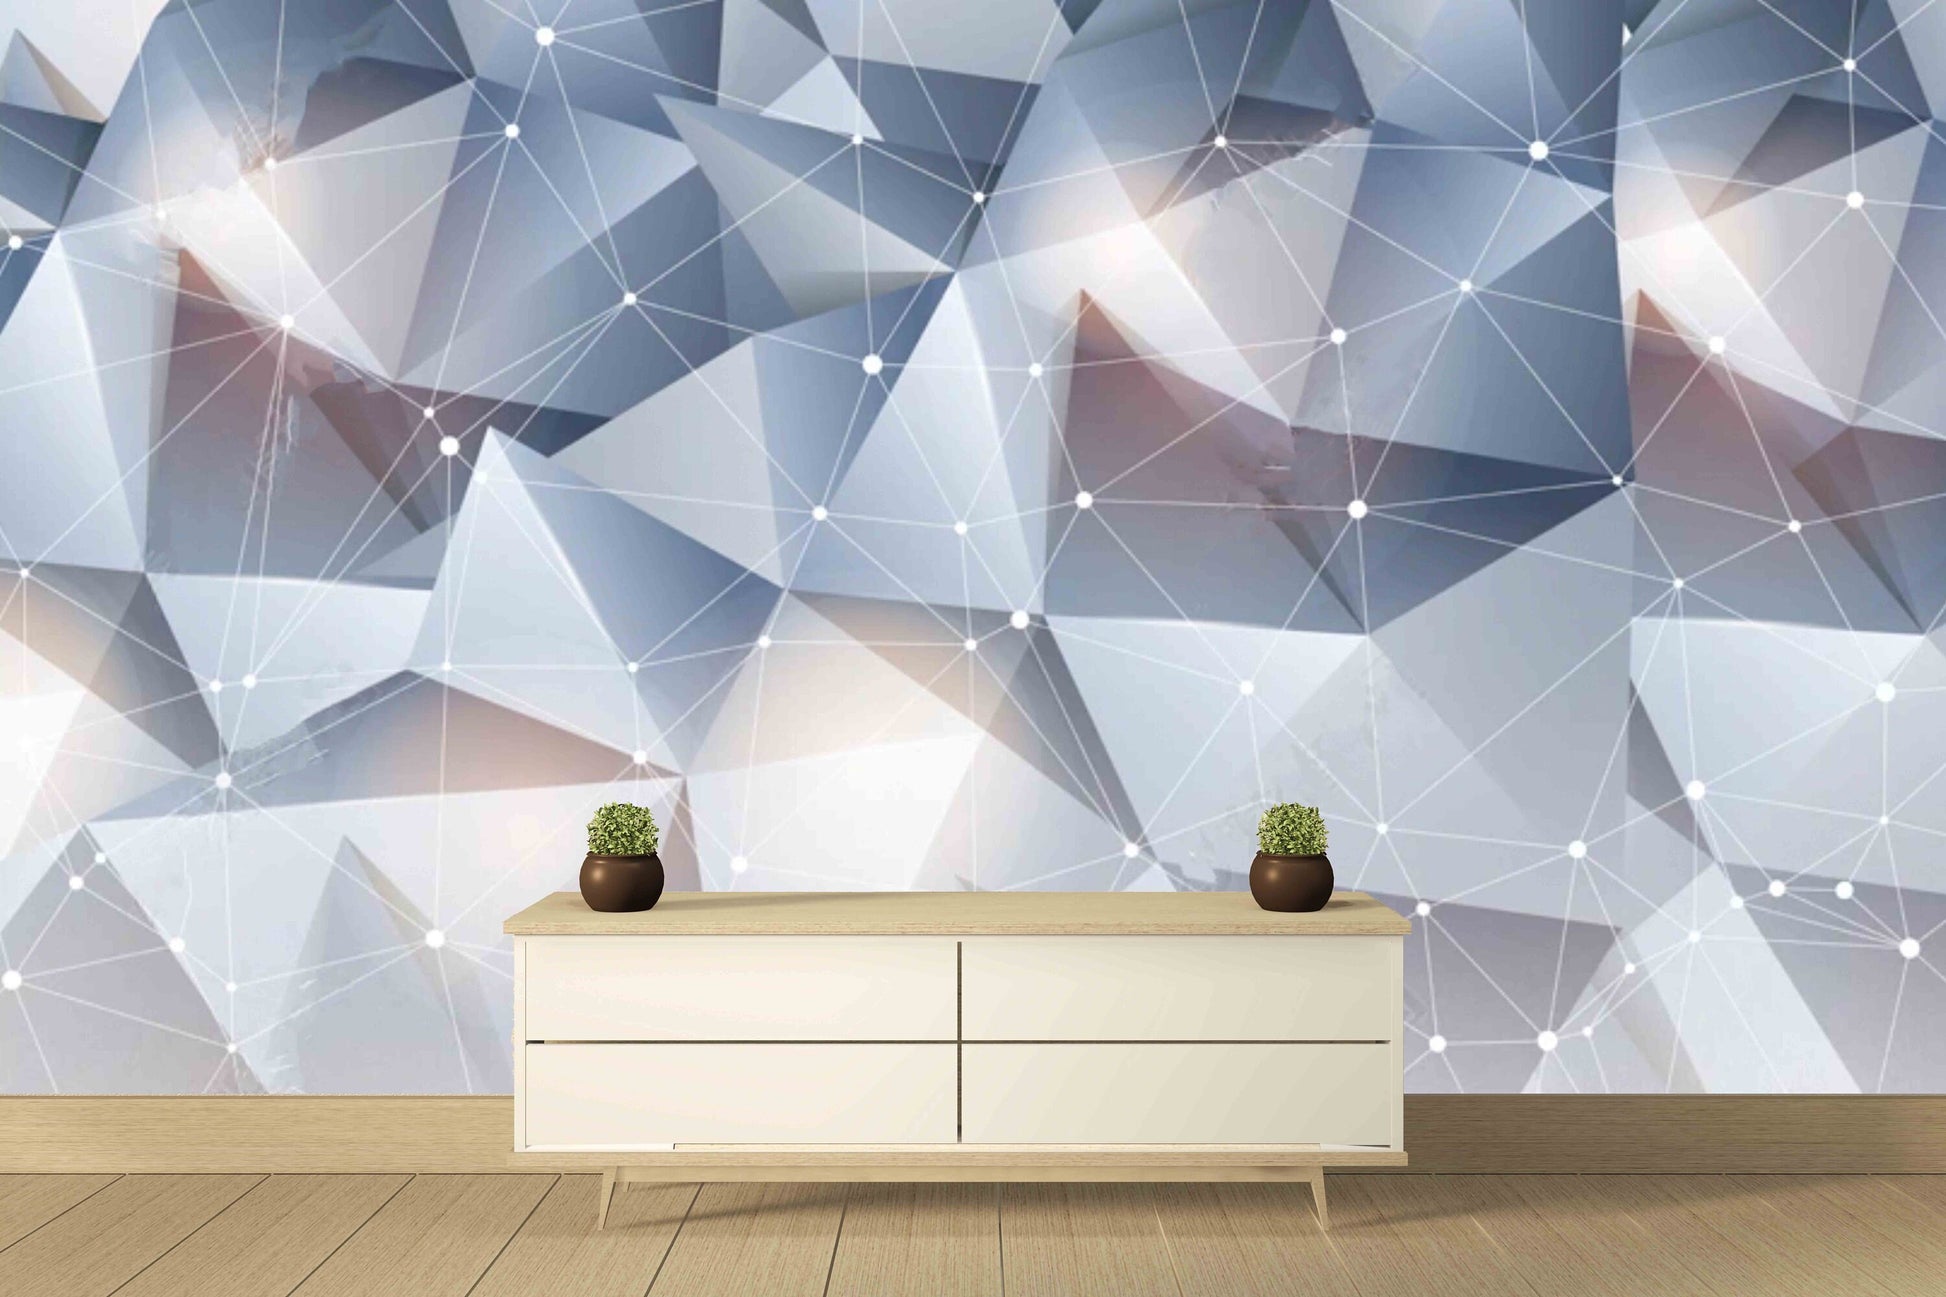 Abstract wallpaper Peel and stick wall mural Photo wallpaper kitchen removable geometric wallpaper 3d wall mural prints wall covering